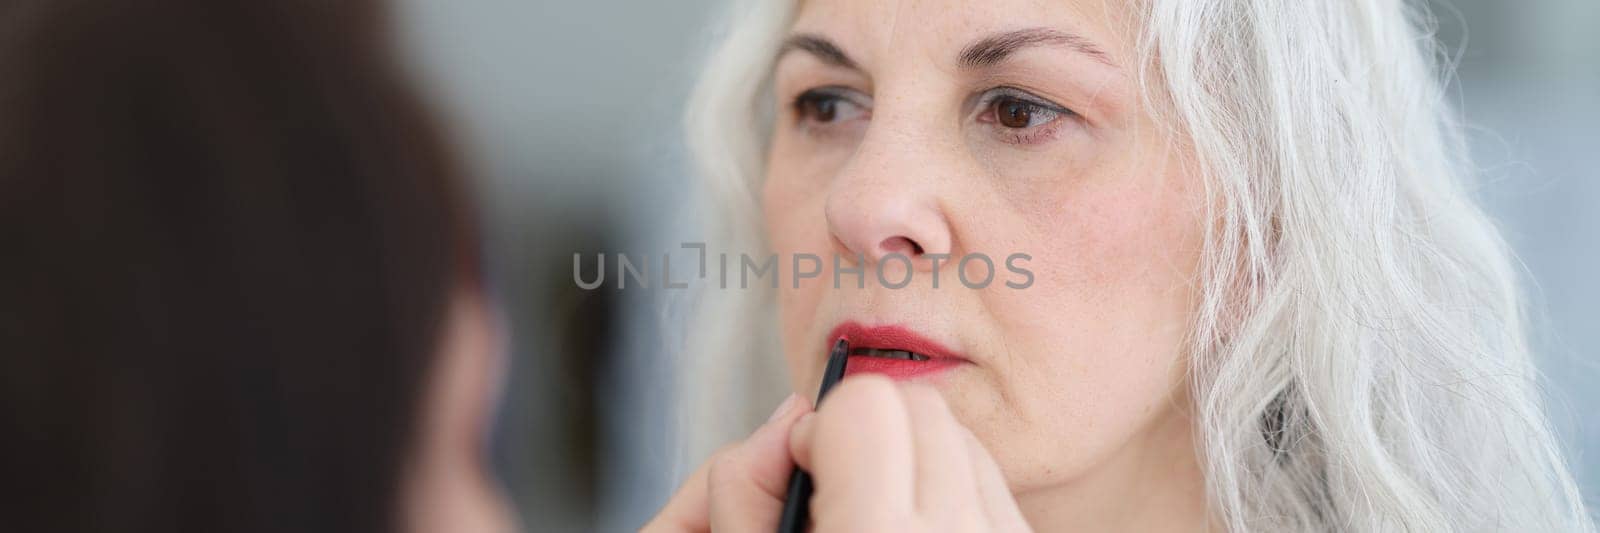 Cosmetologist painting lips with red lipstick to elderly woman. Makeup for any age concept